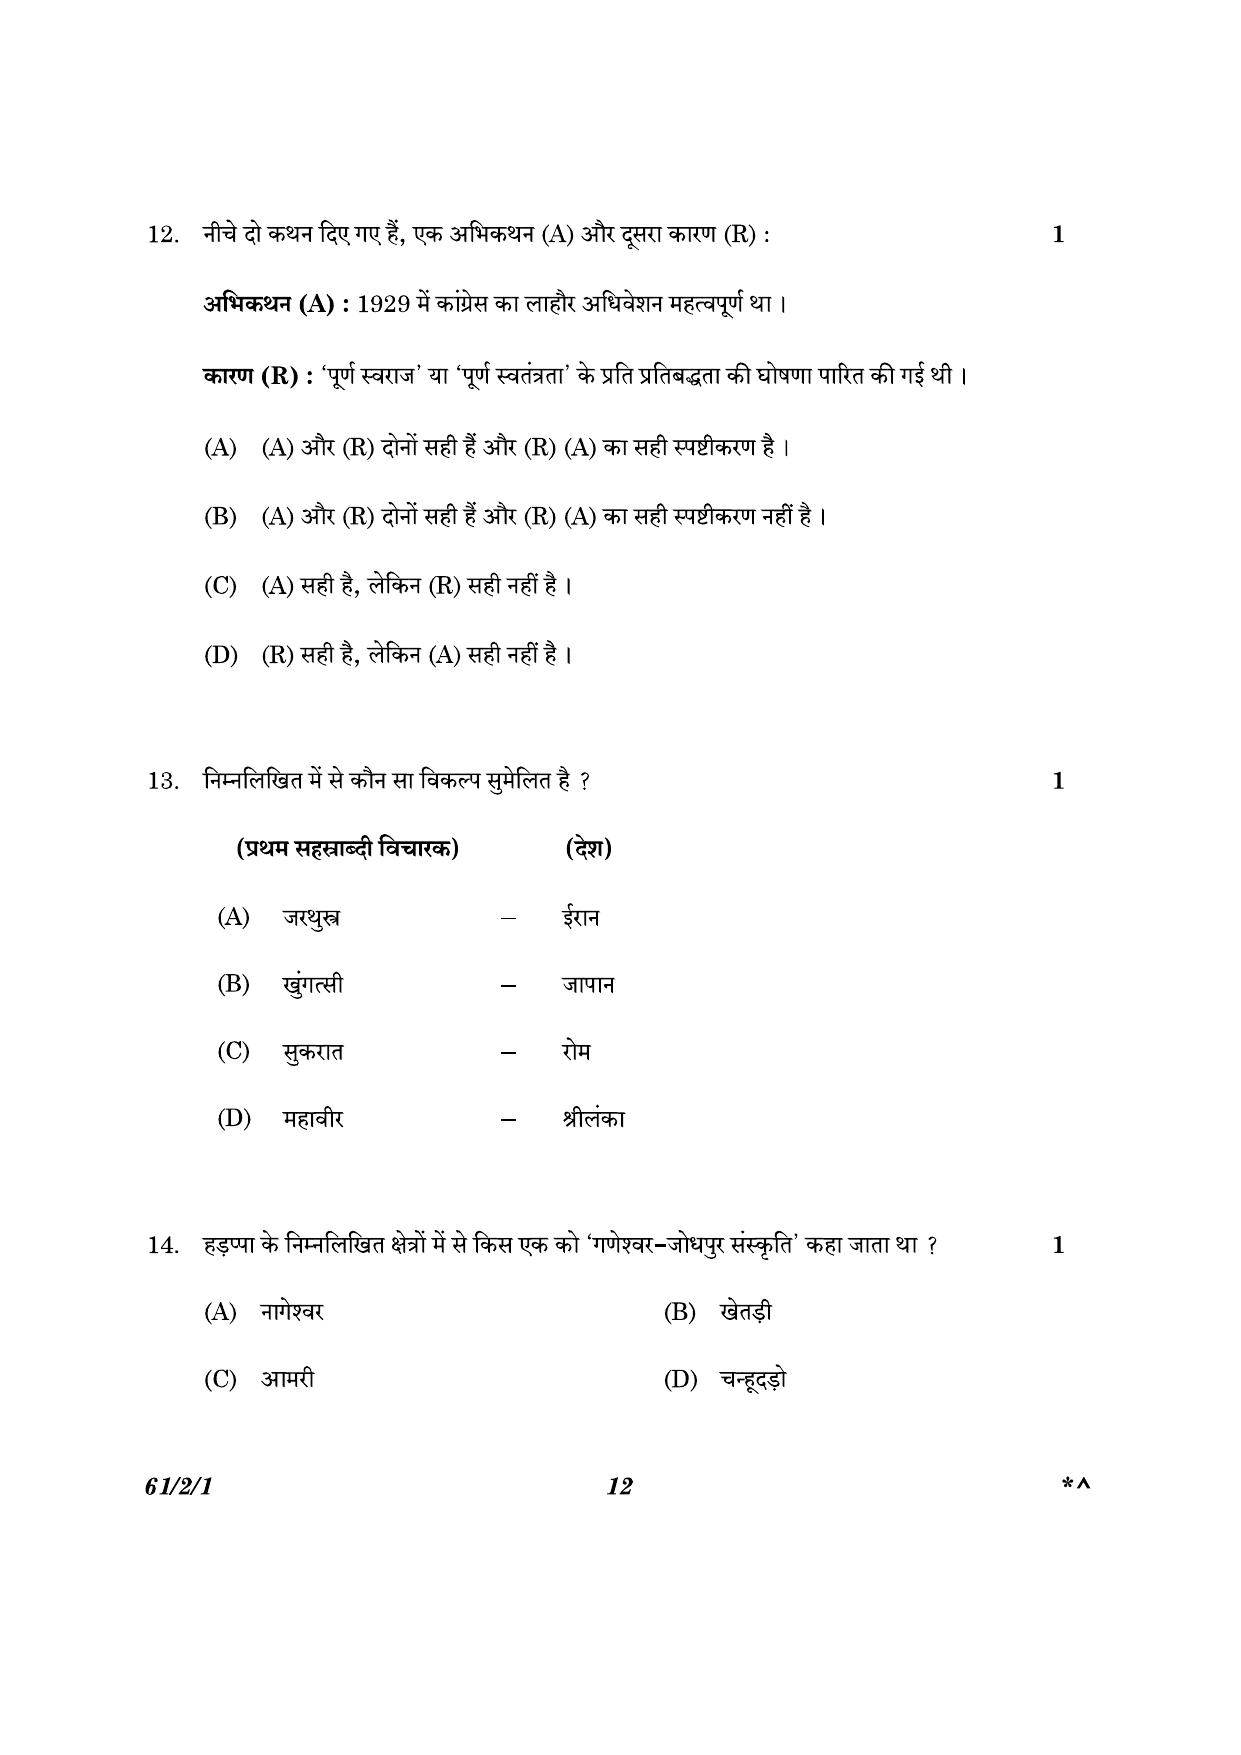 CBSE Class 12 61-2-1 History 2023 Question Paper - Page 12